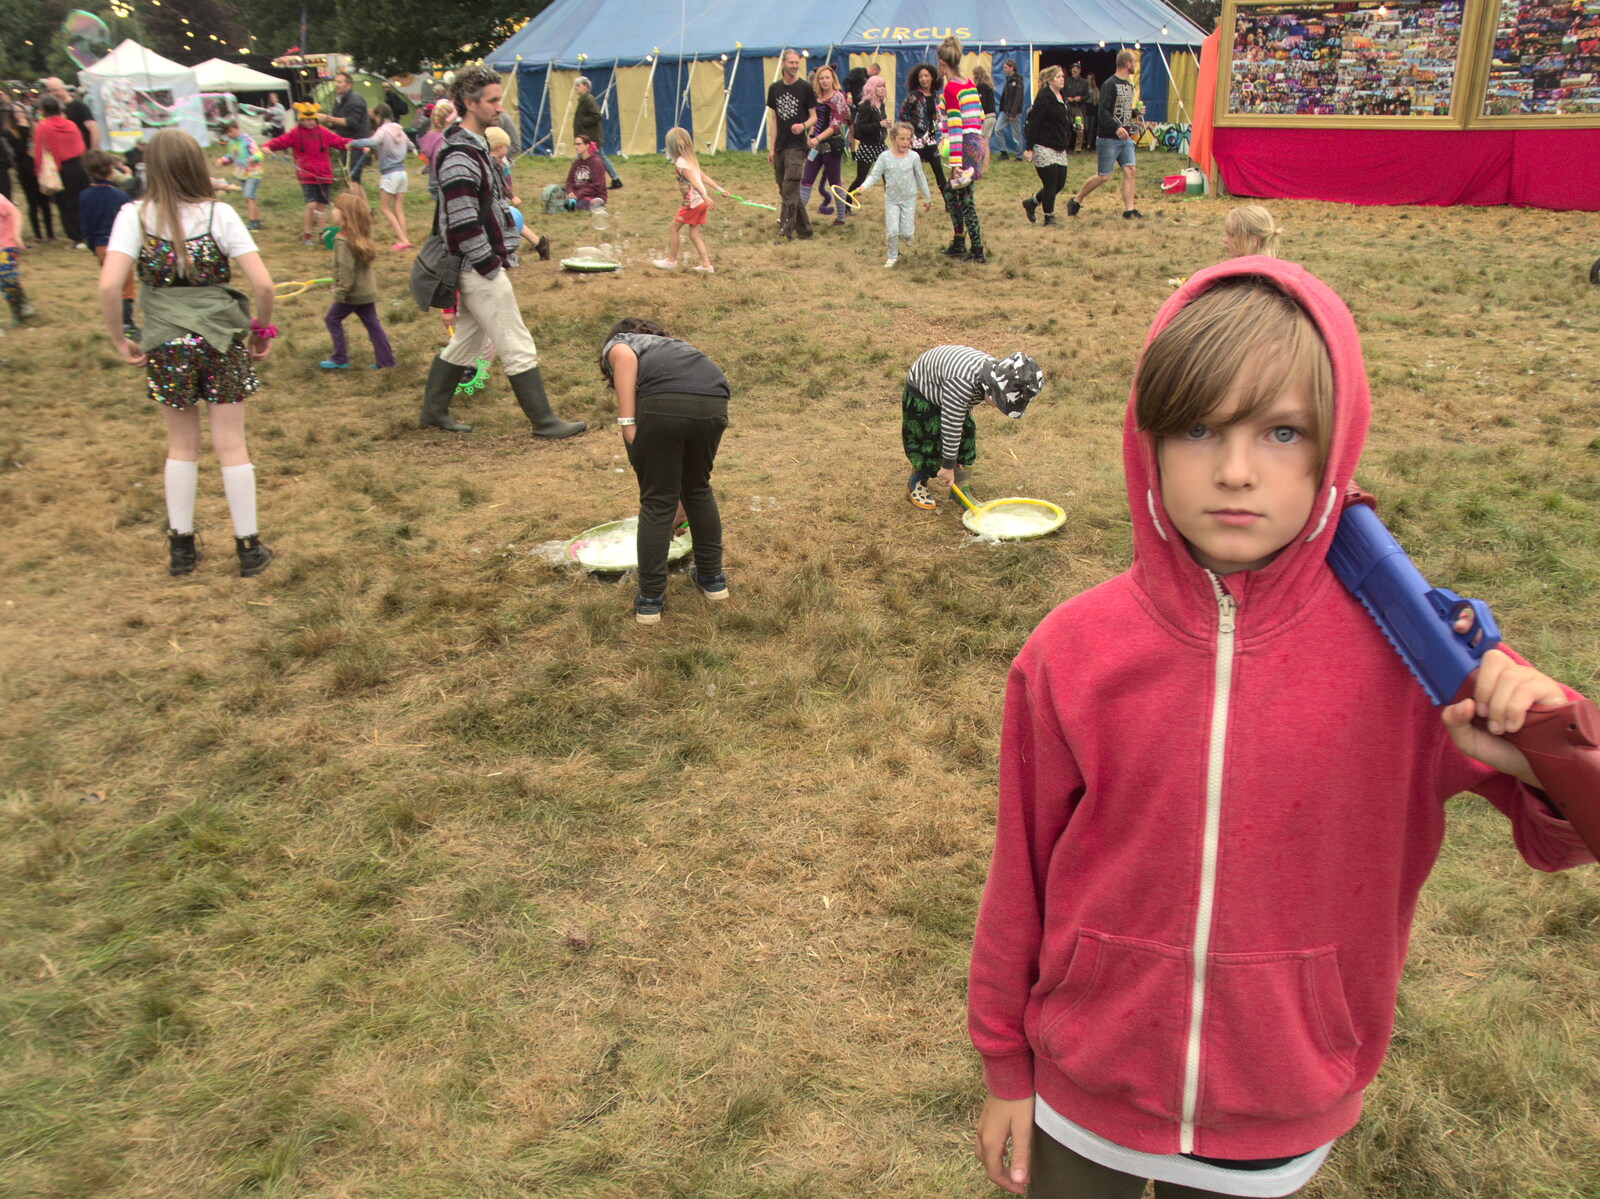 Harry's locked and loaded from Maui Waui Festival, Hill Farm, Gressenhall, Norfolk - 28th August 2021